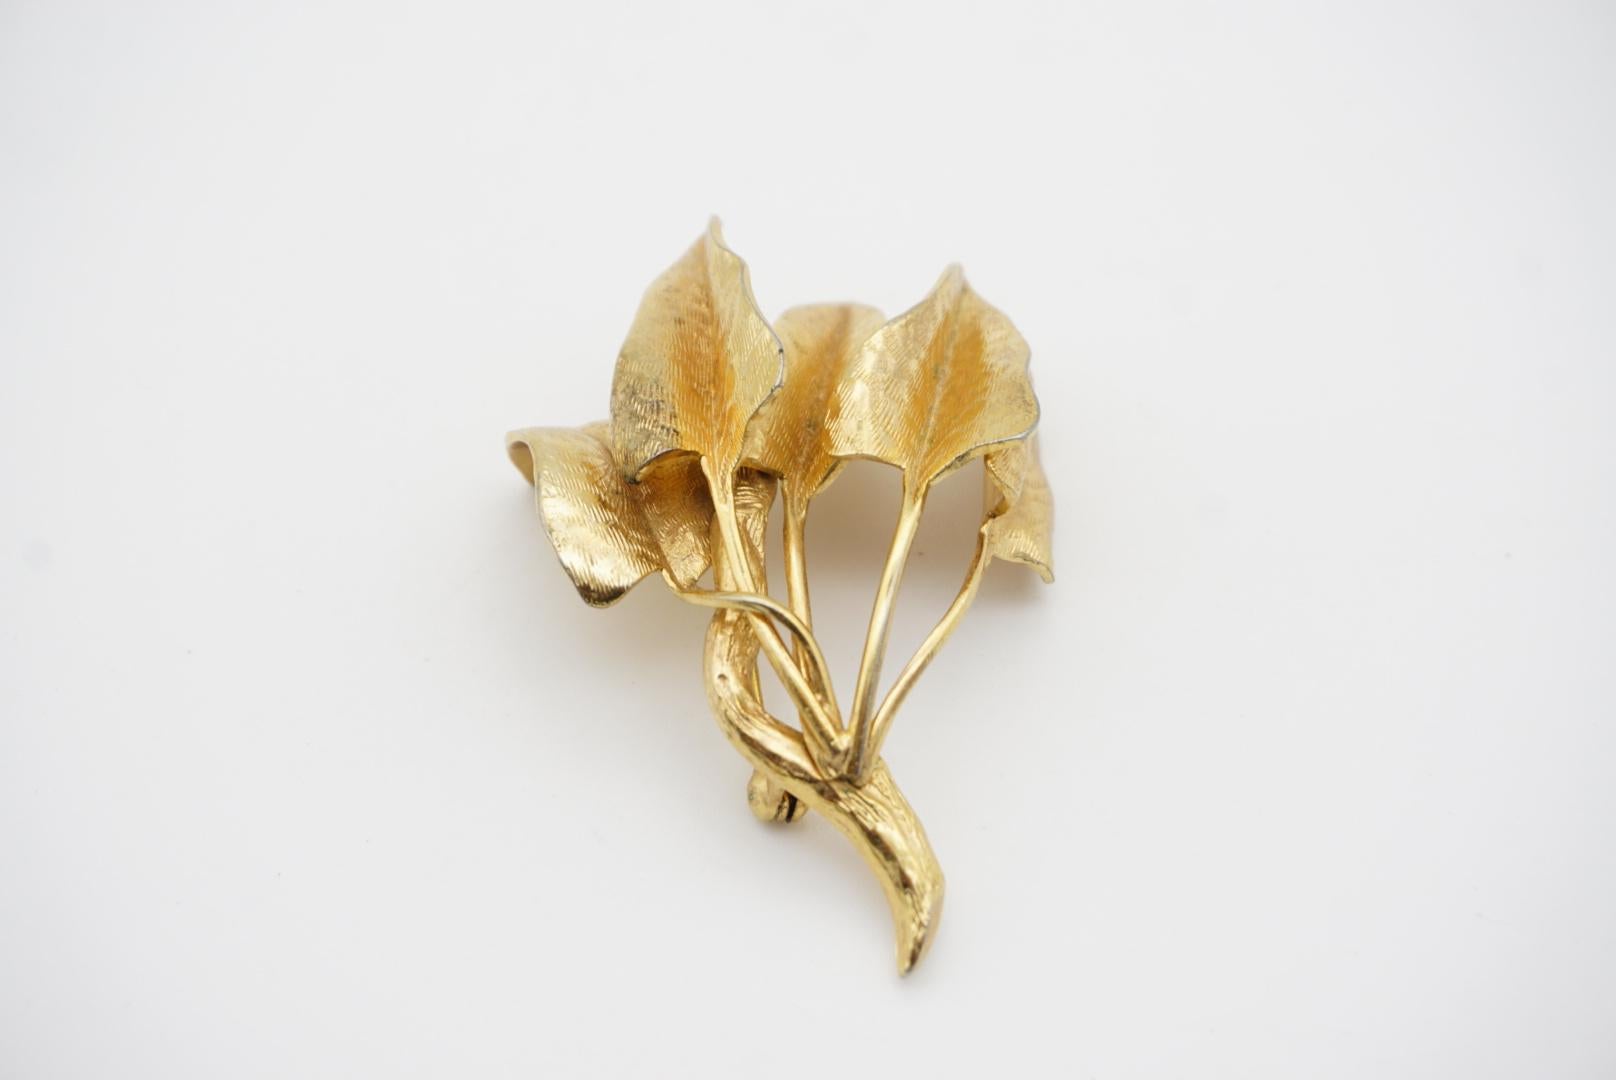 Christian Dior GROSSE 1962 Vintage Texture Leaf Tree Bush Gold Exquisite Brooch In Excellent Condition For Sale In Wokingham, England